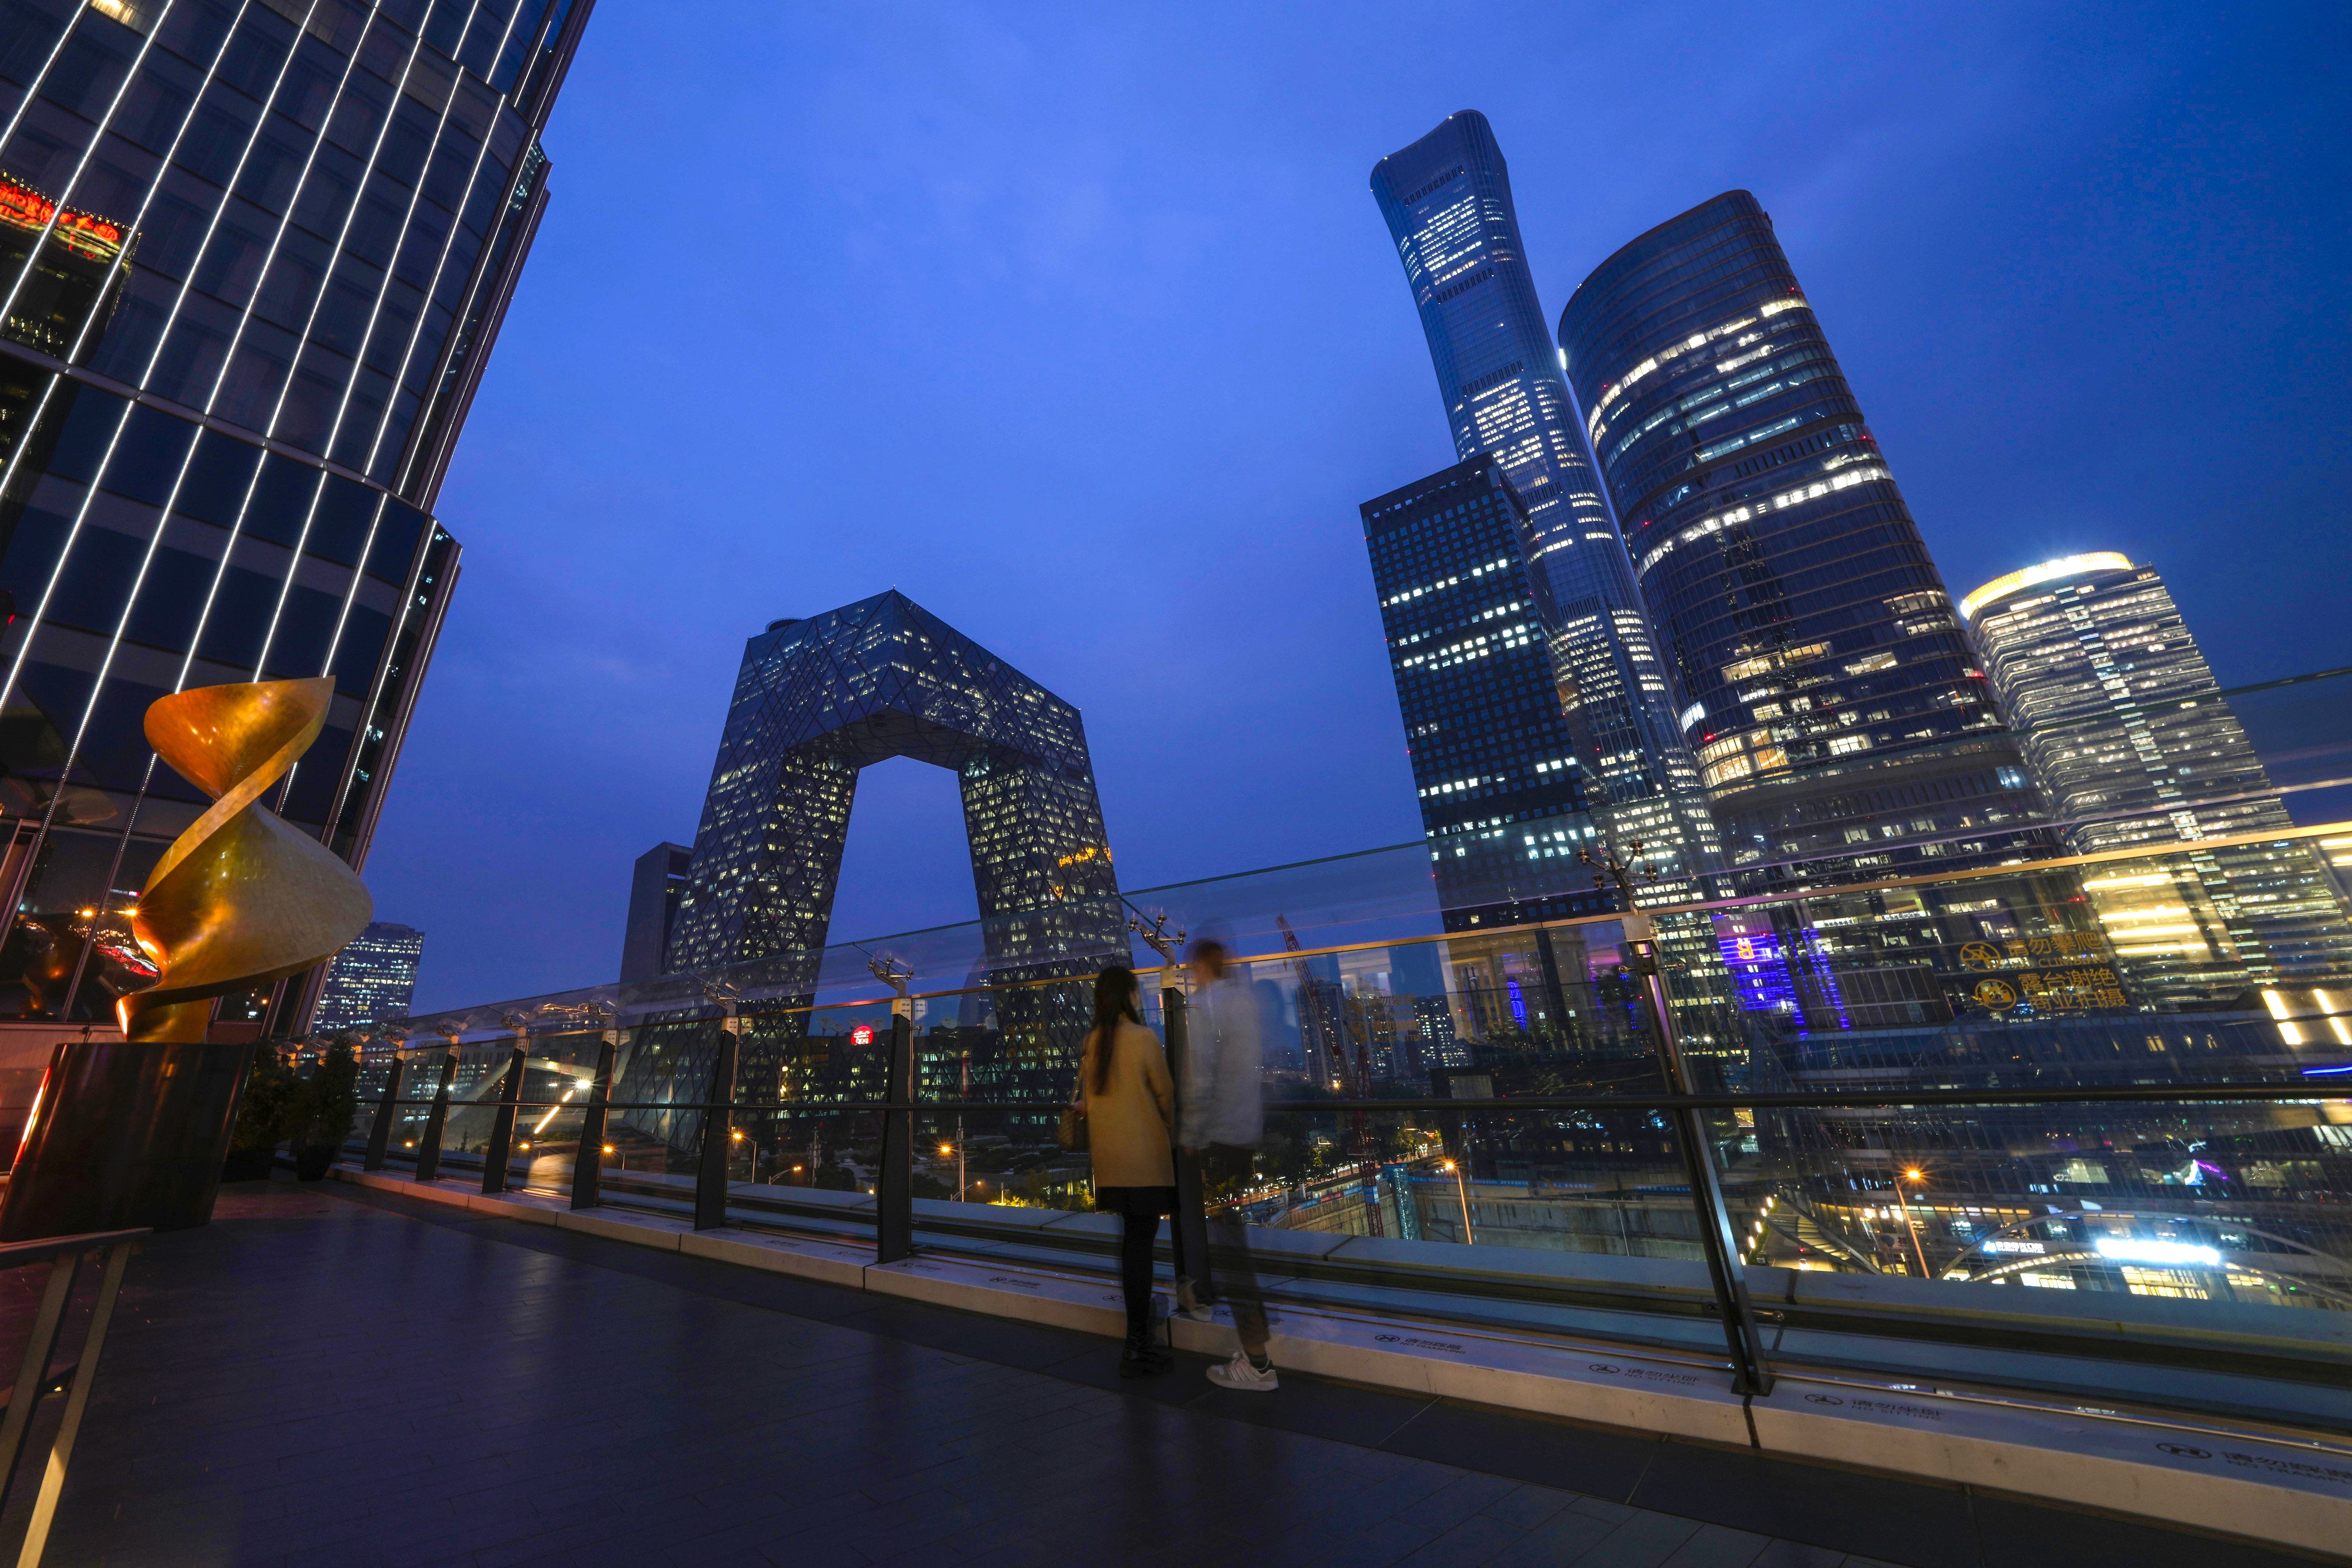 People linger in the Central Business District of Beijing on October 26, 2022. Photo: AP